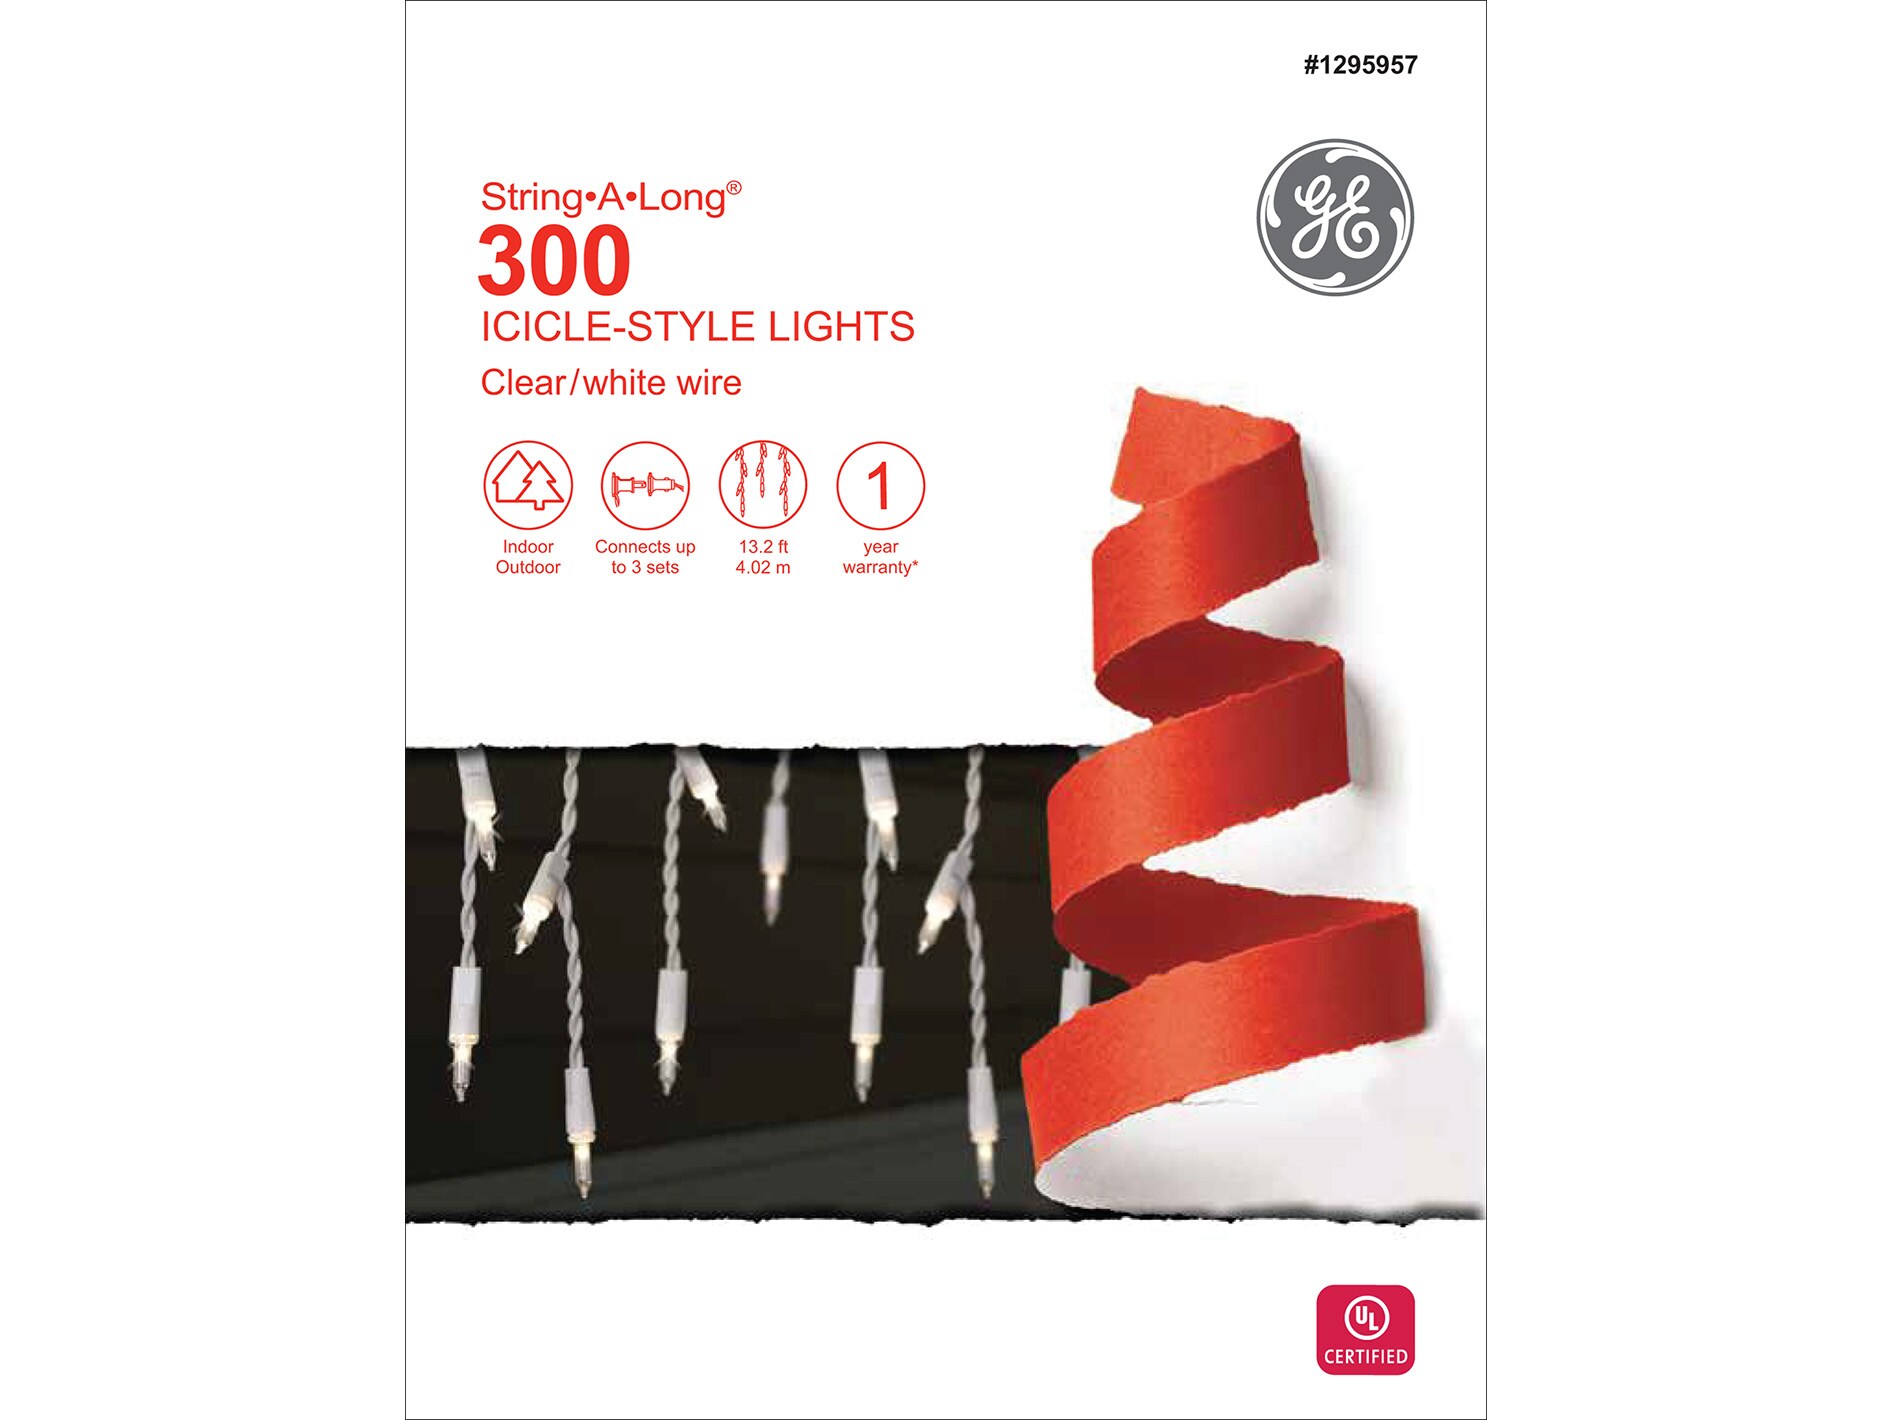 Details about   GE Icicle-Style Lights String-A-Long 300 "Clear Lights" Bulbs 13.2' Christmas 